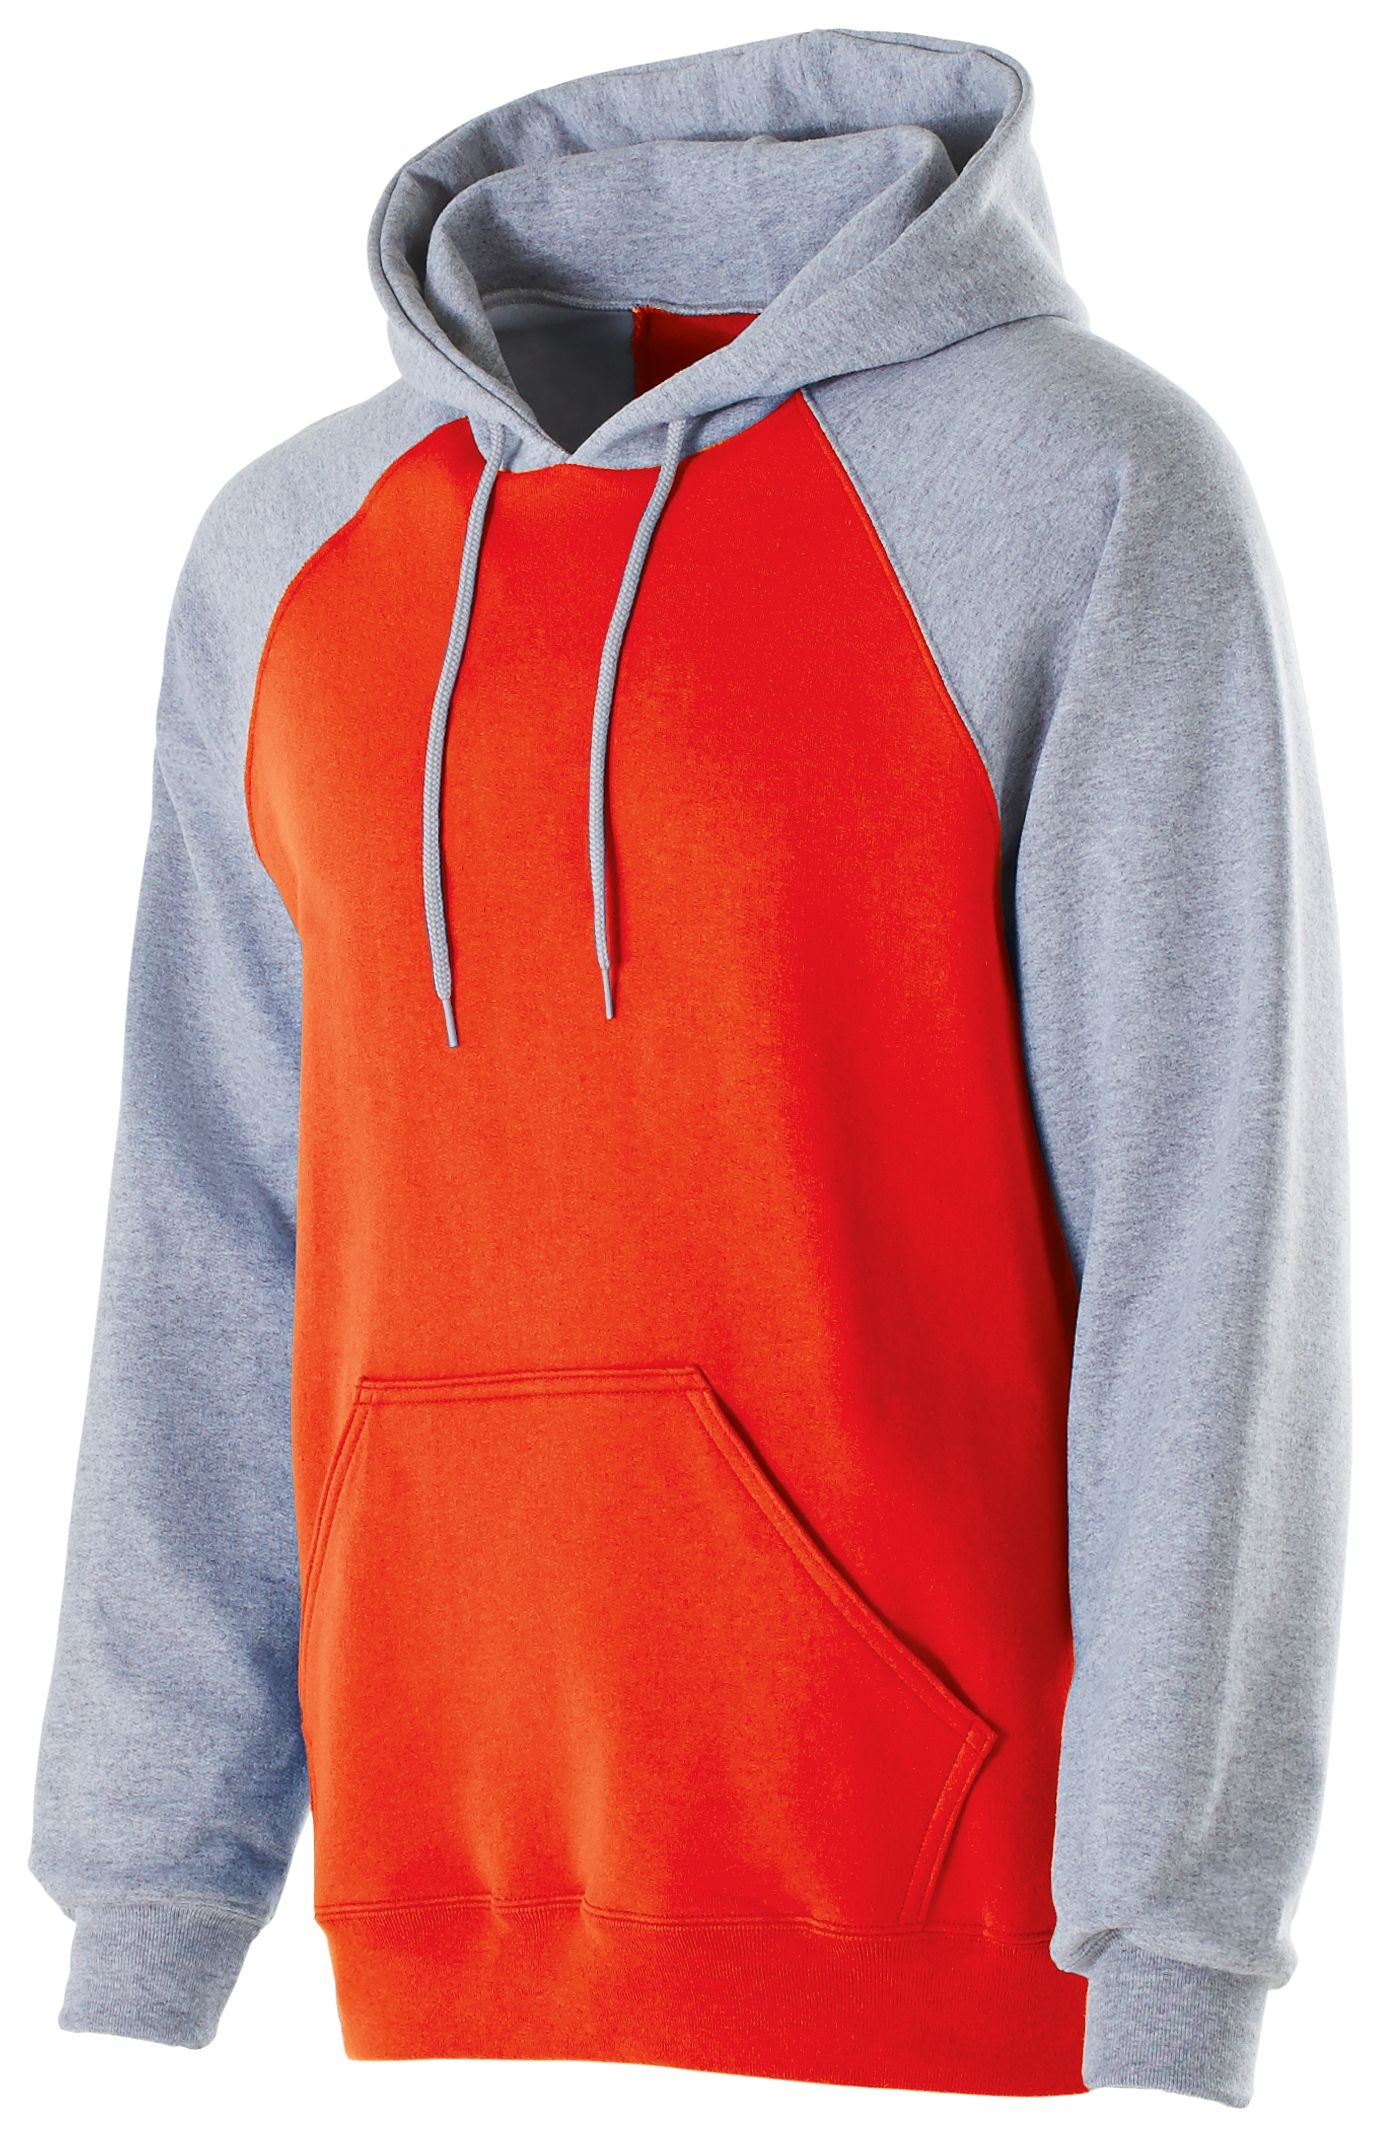 Holloway Banner Hoodie in Orange/Athletic Heather  -Part of the Adult, Adult-Hoodie, Hoodies, Holloway product lines at KanaleyCreations.com